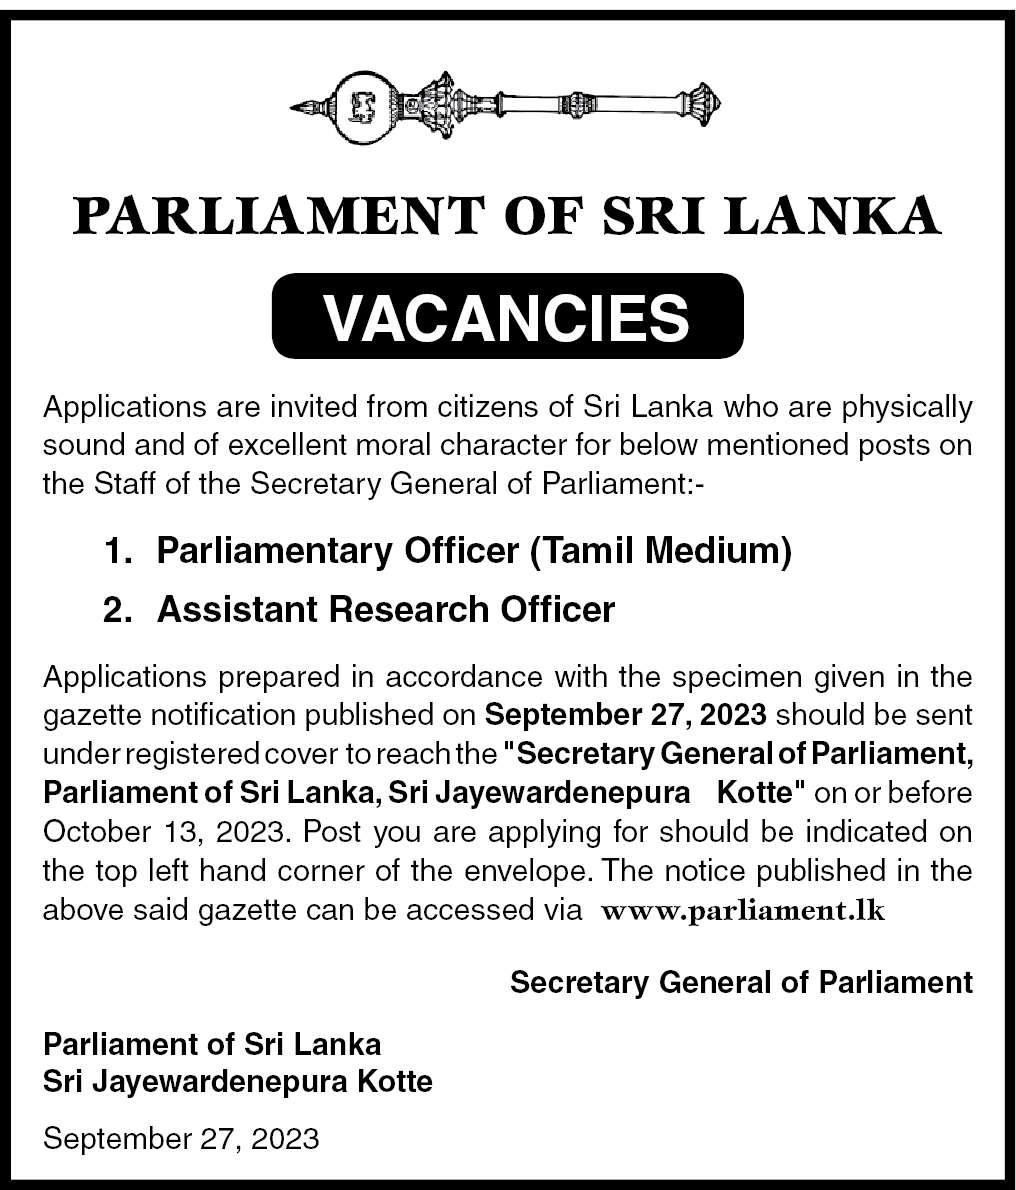 Parliamentary officer, Assistant Research Officer